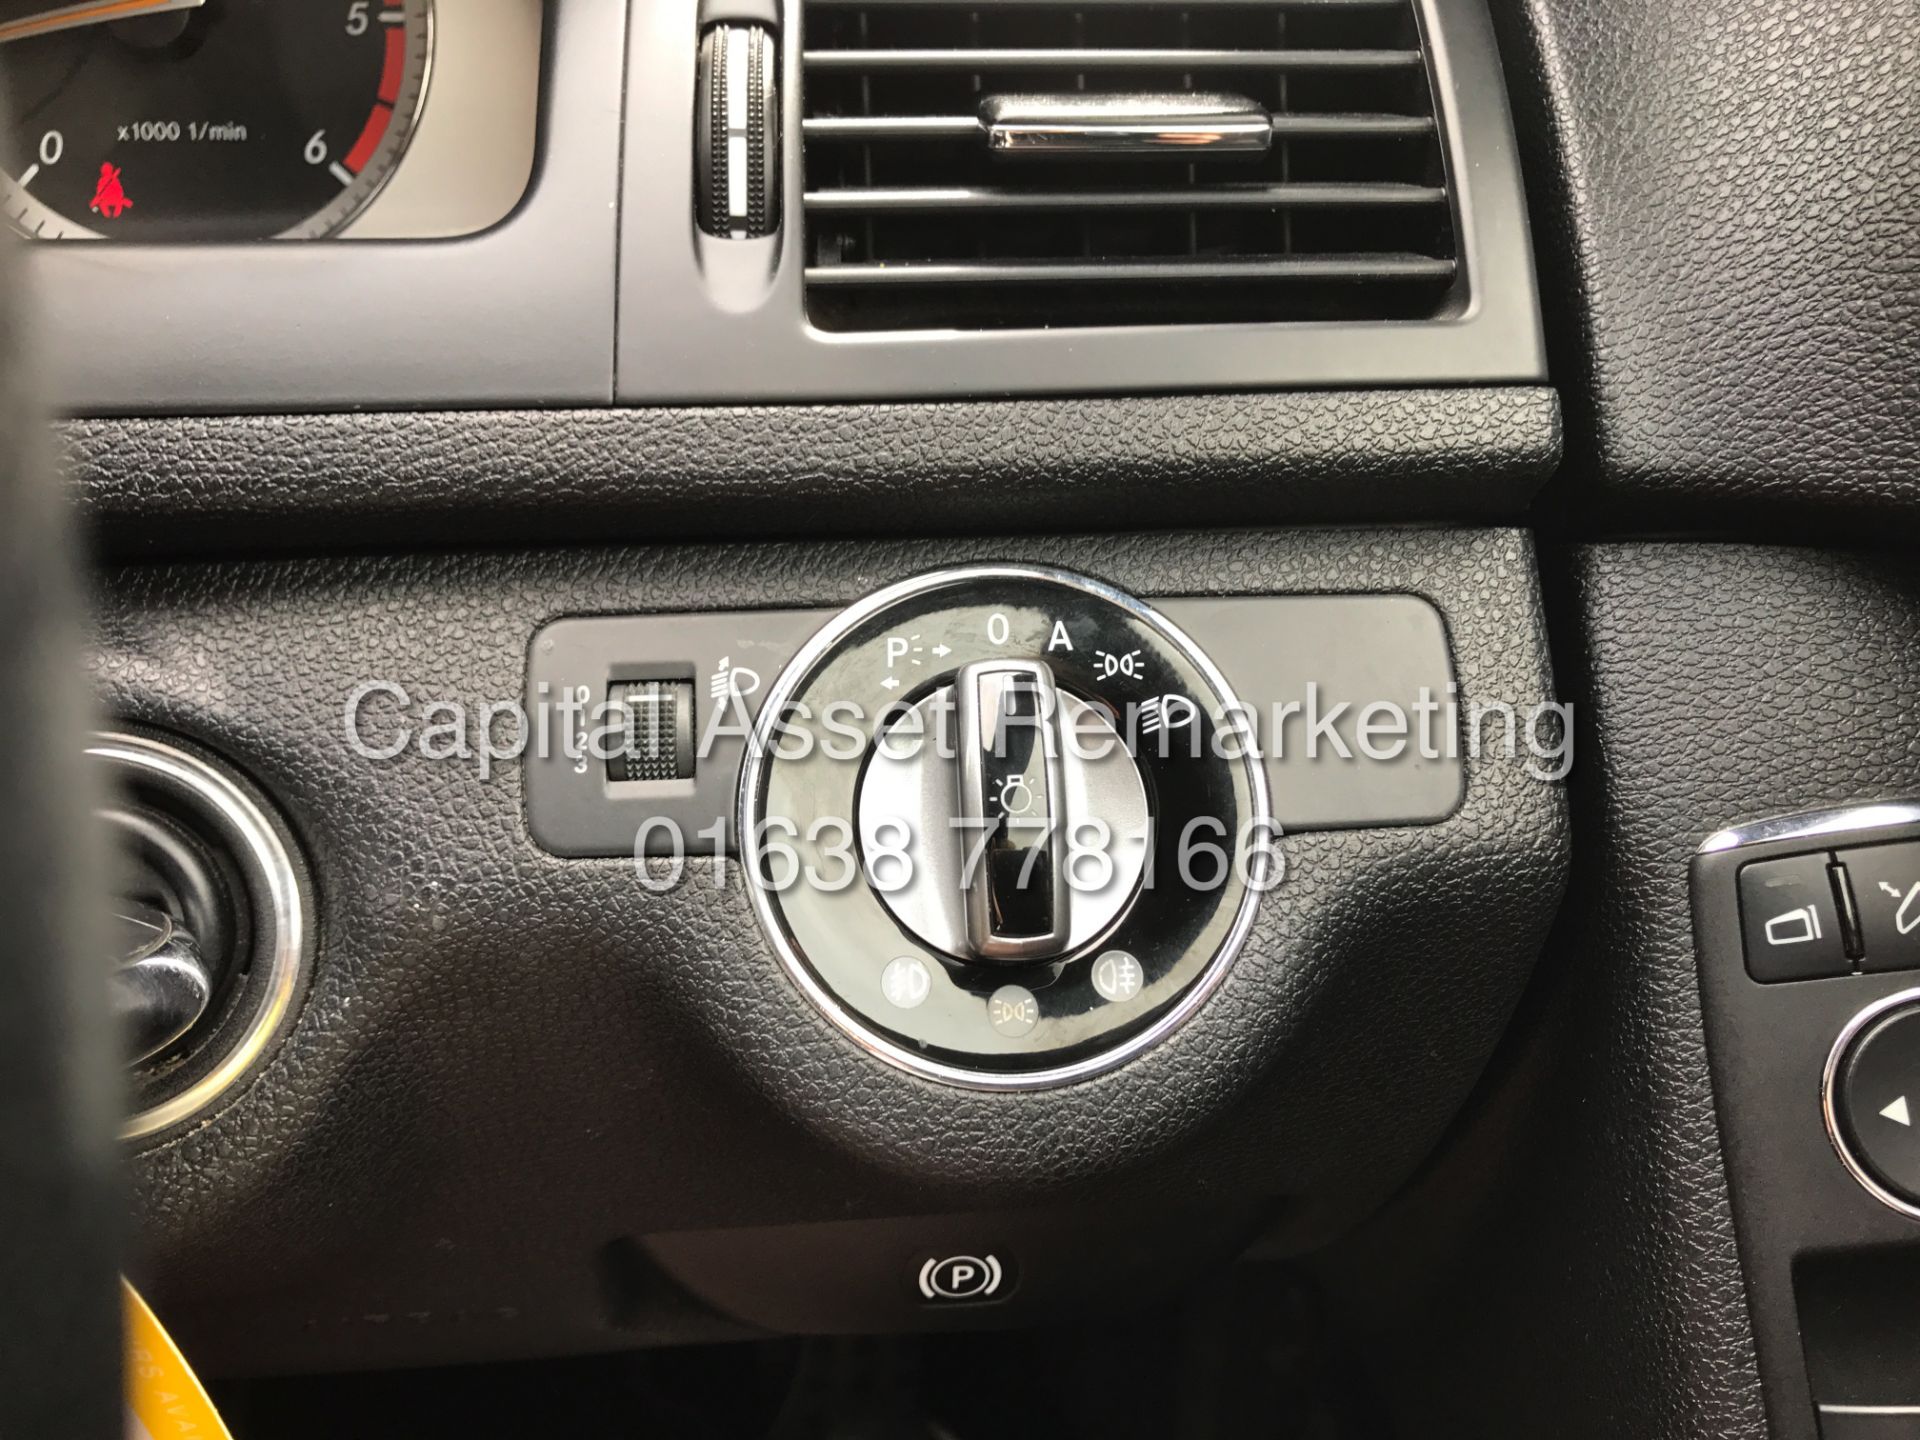 MERCEDES C220CDI "AMG SPORT" ESTATE - CLIMATE - AIR CON - LEATHER - TOP SPEC - Image 16 of 20